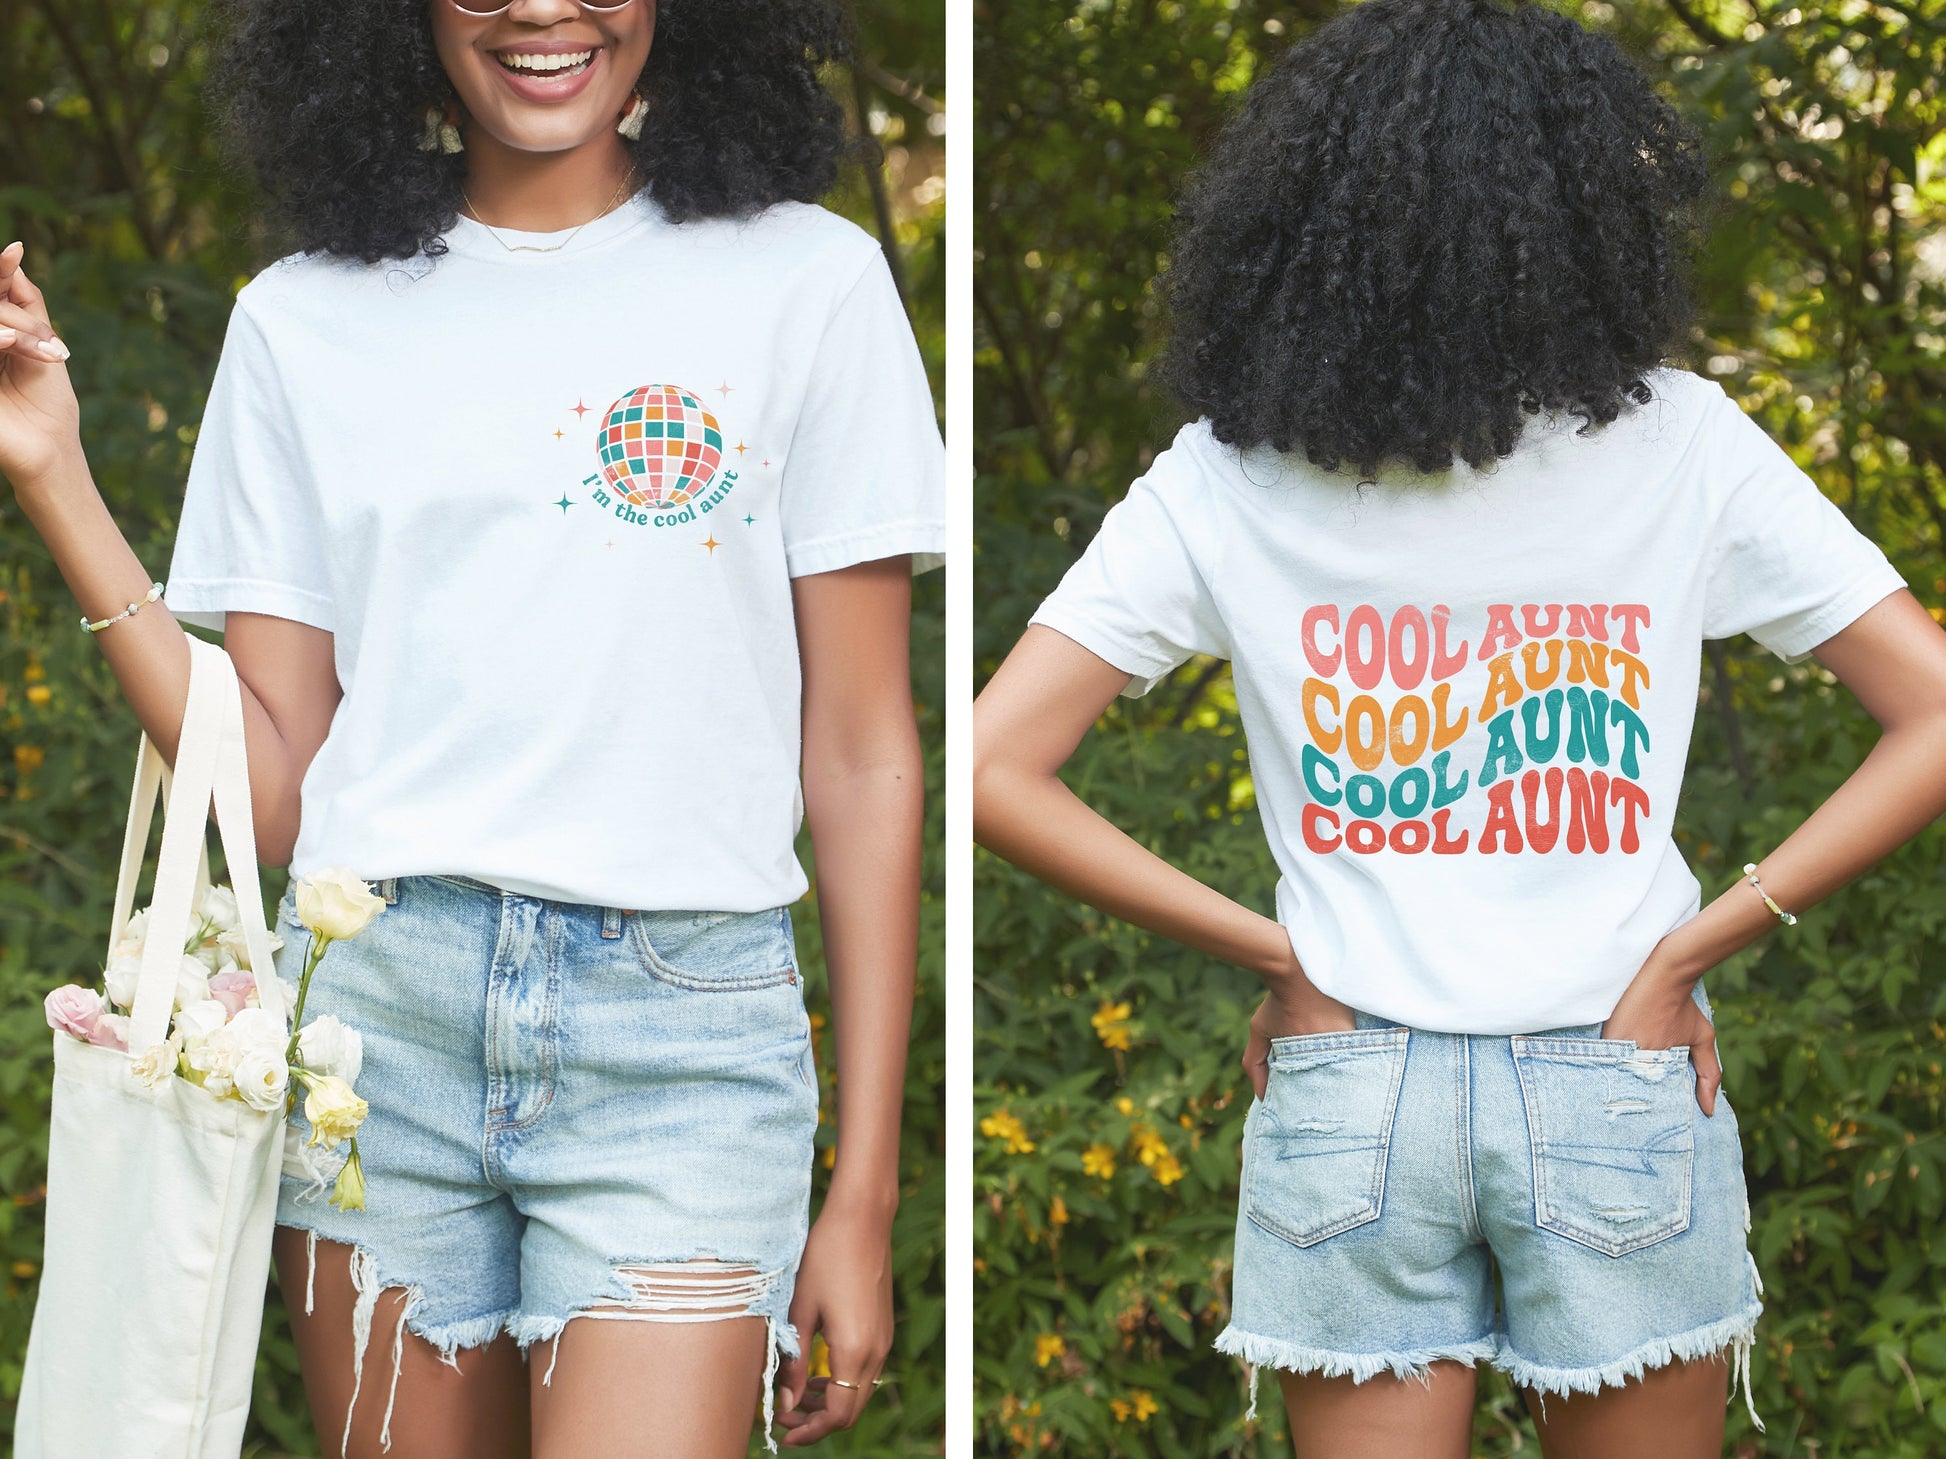 Cool Aunt Shirt, New Aunt Shirt, Wavy Retro Shirt, Oversized Comfy Tee, Gift for Aunt, Disco Ball Shirt